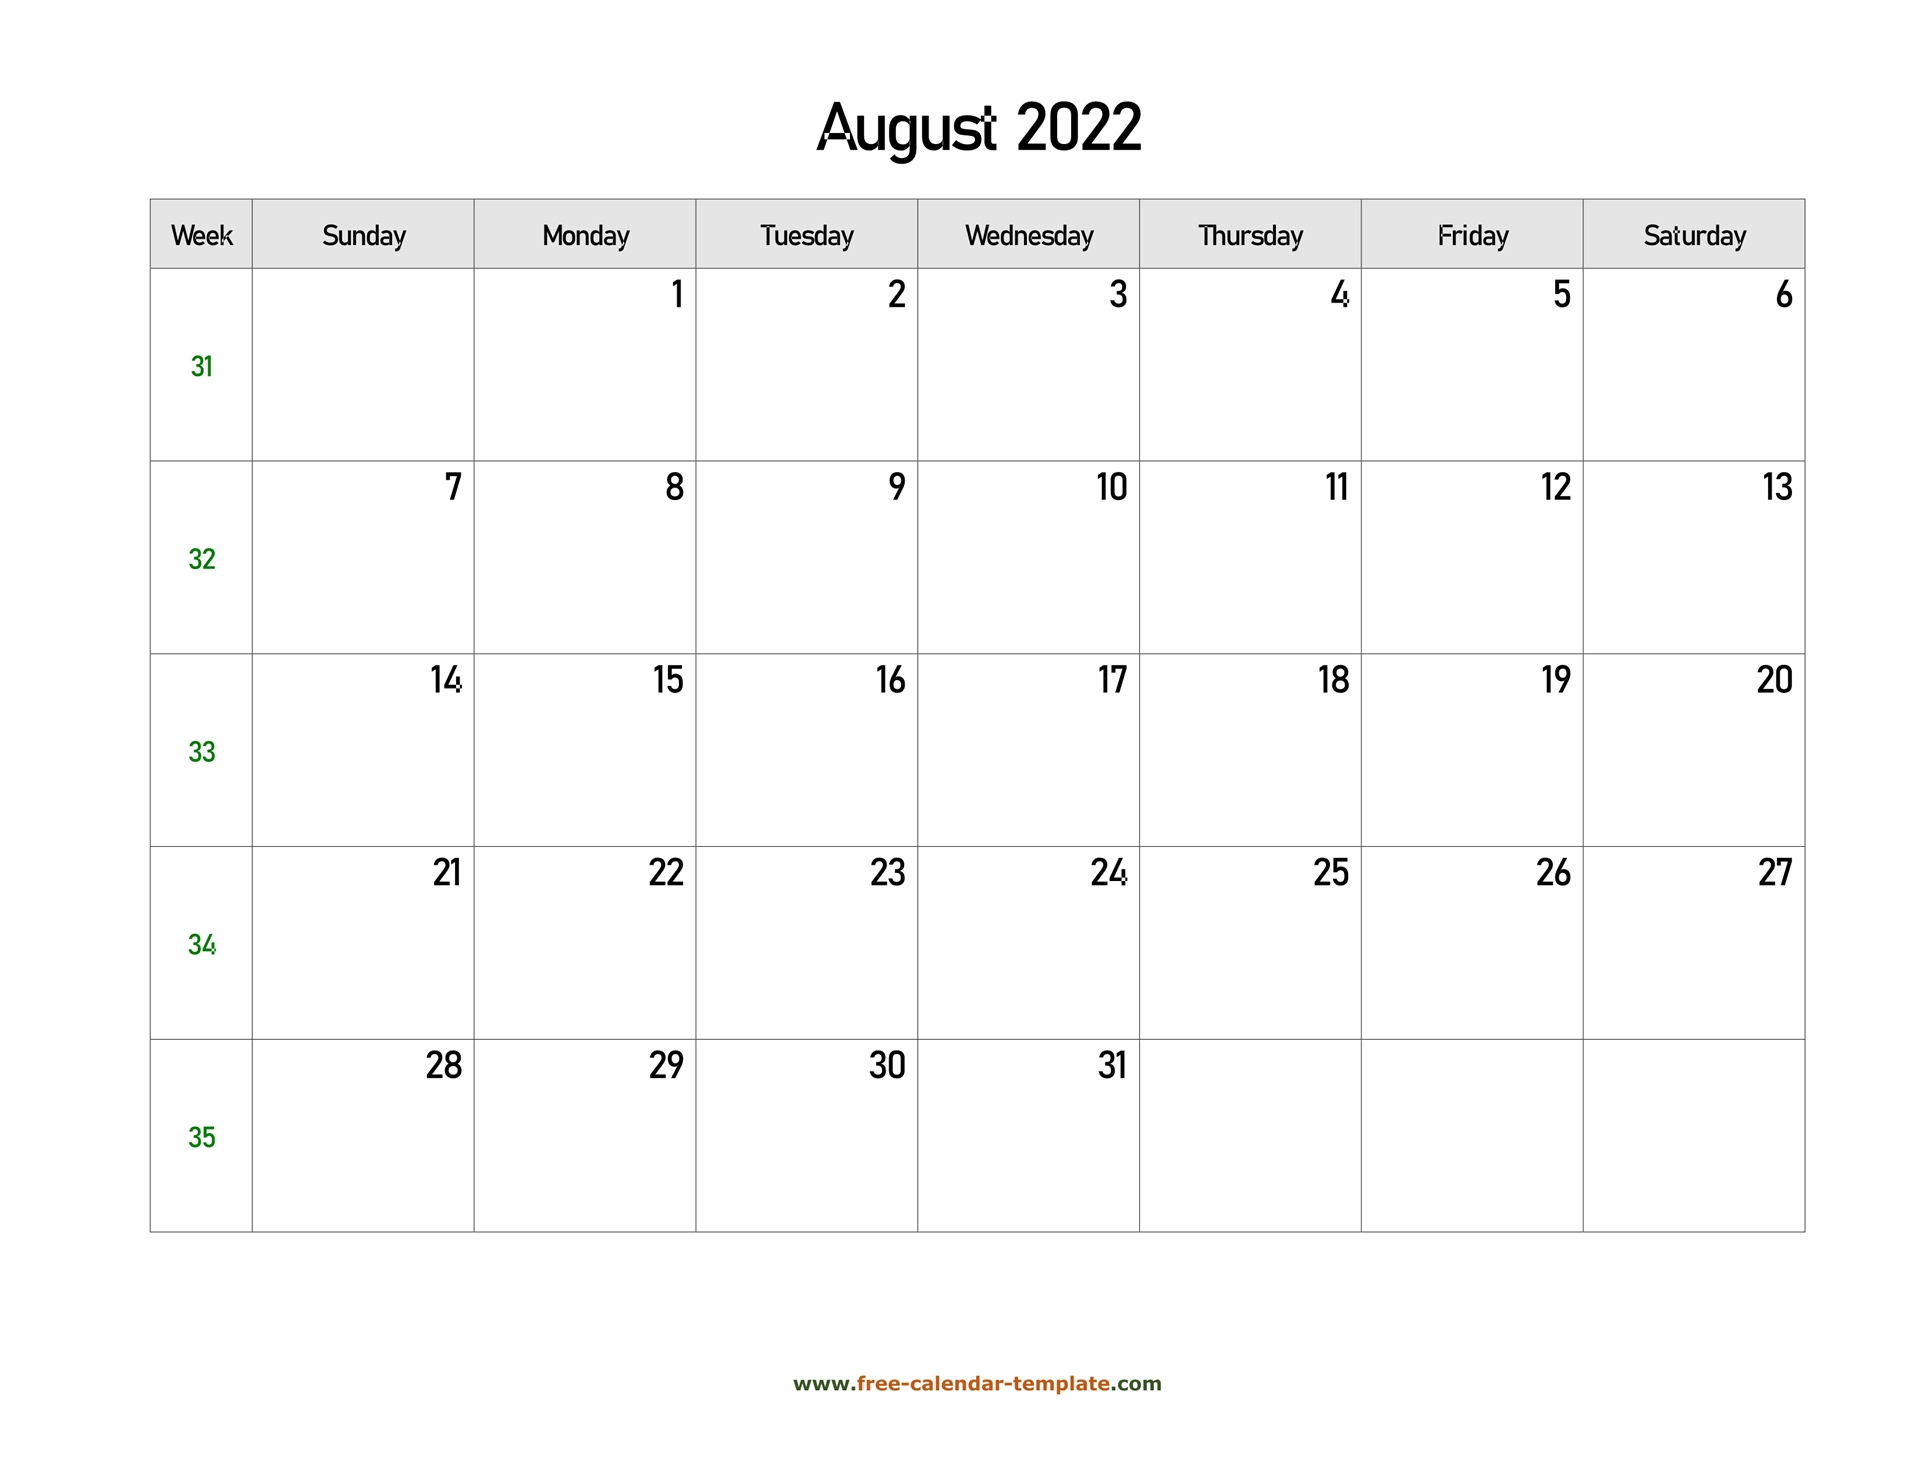 Collect Calendar 2022 August Month